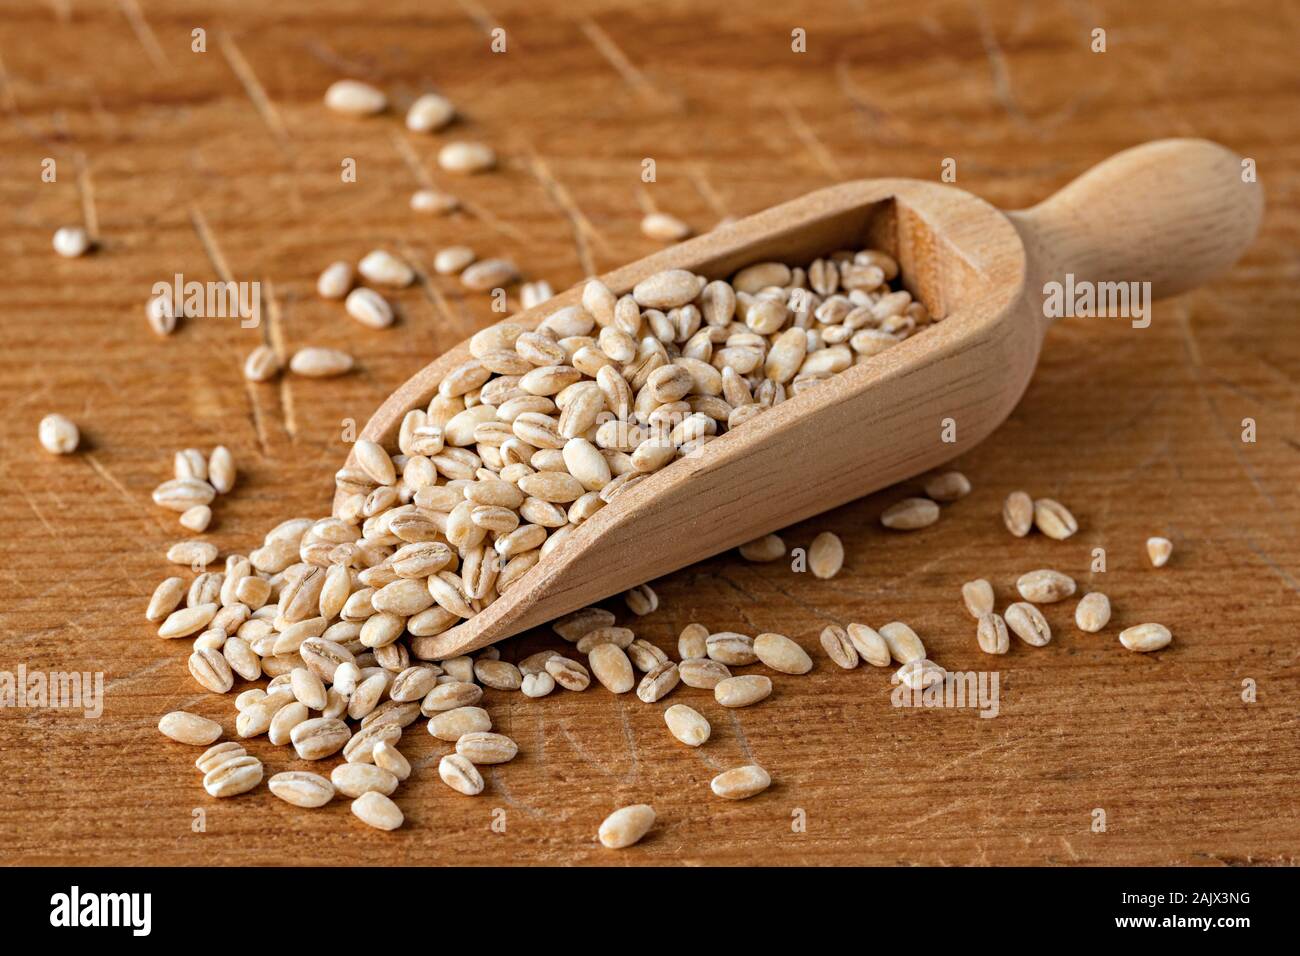 Pearl barley, or pearled barley, in a scoop, on a wooden board. Stock Photo